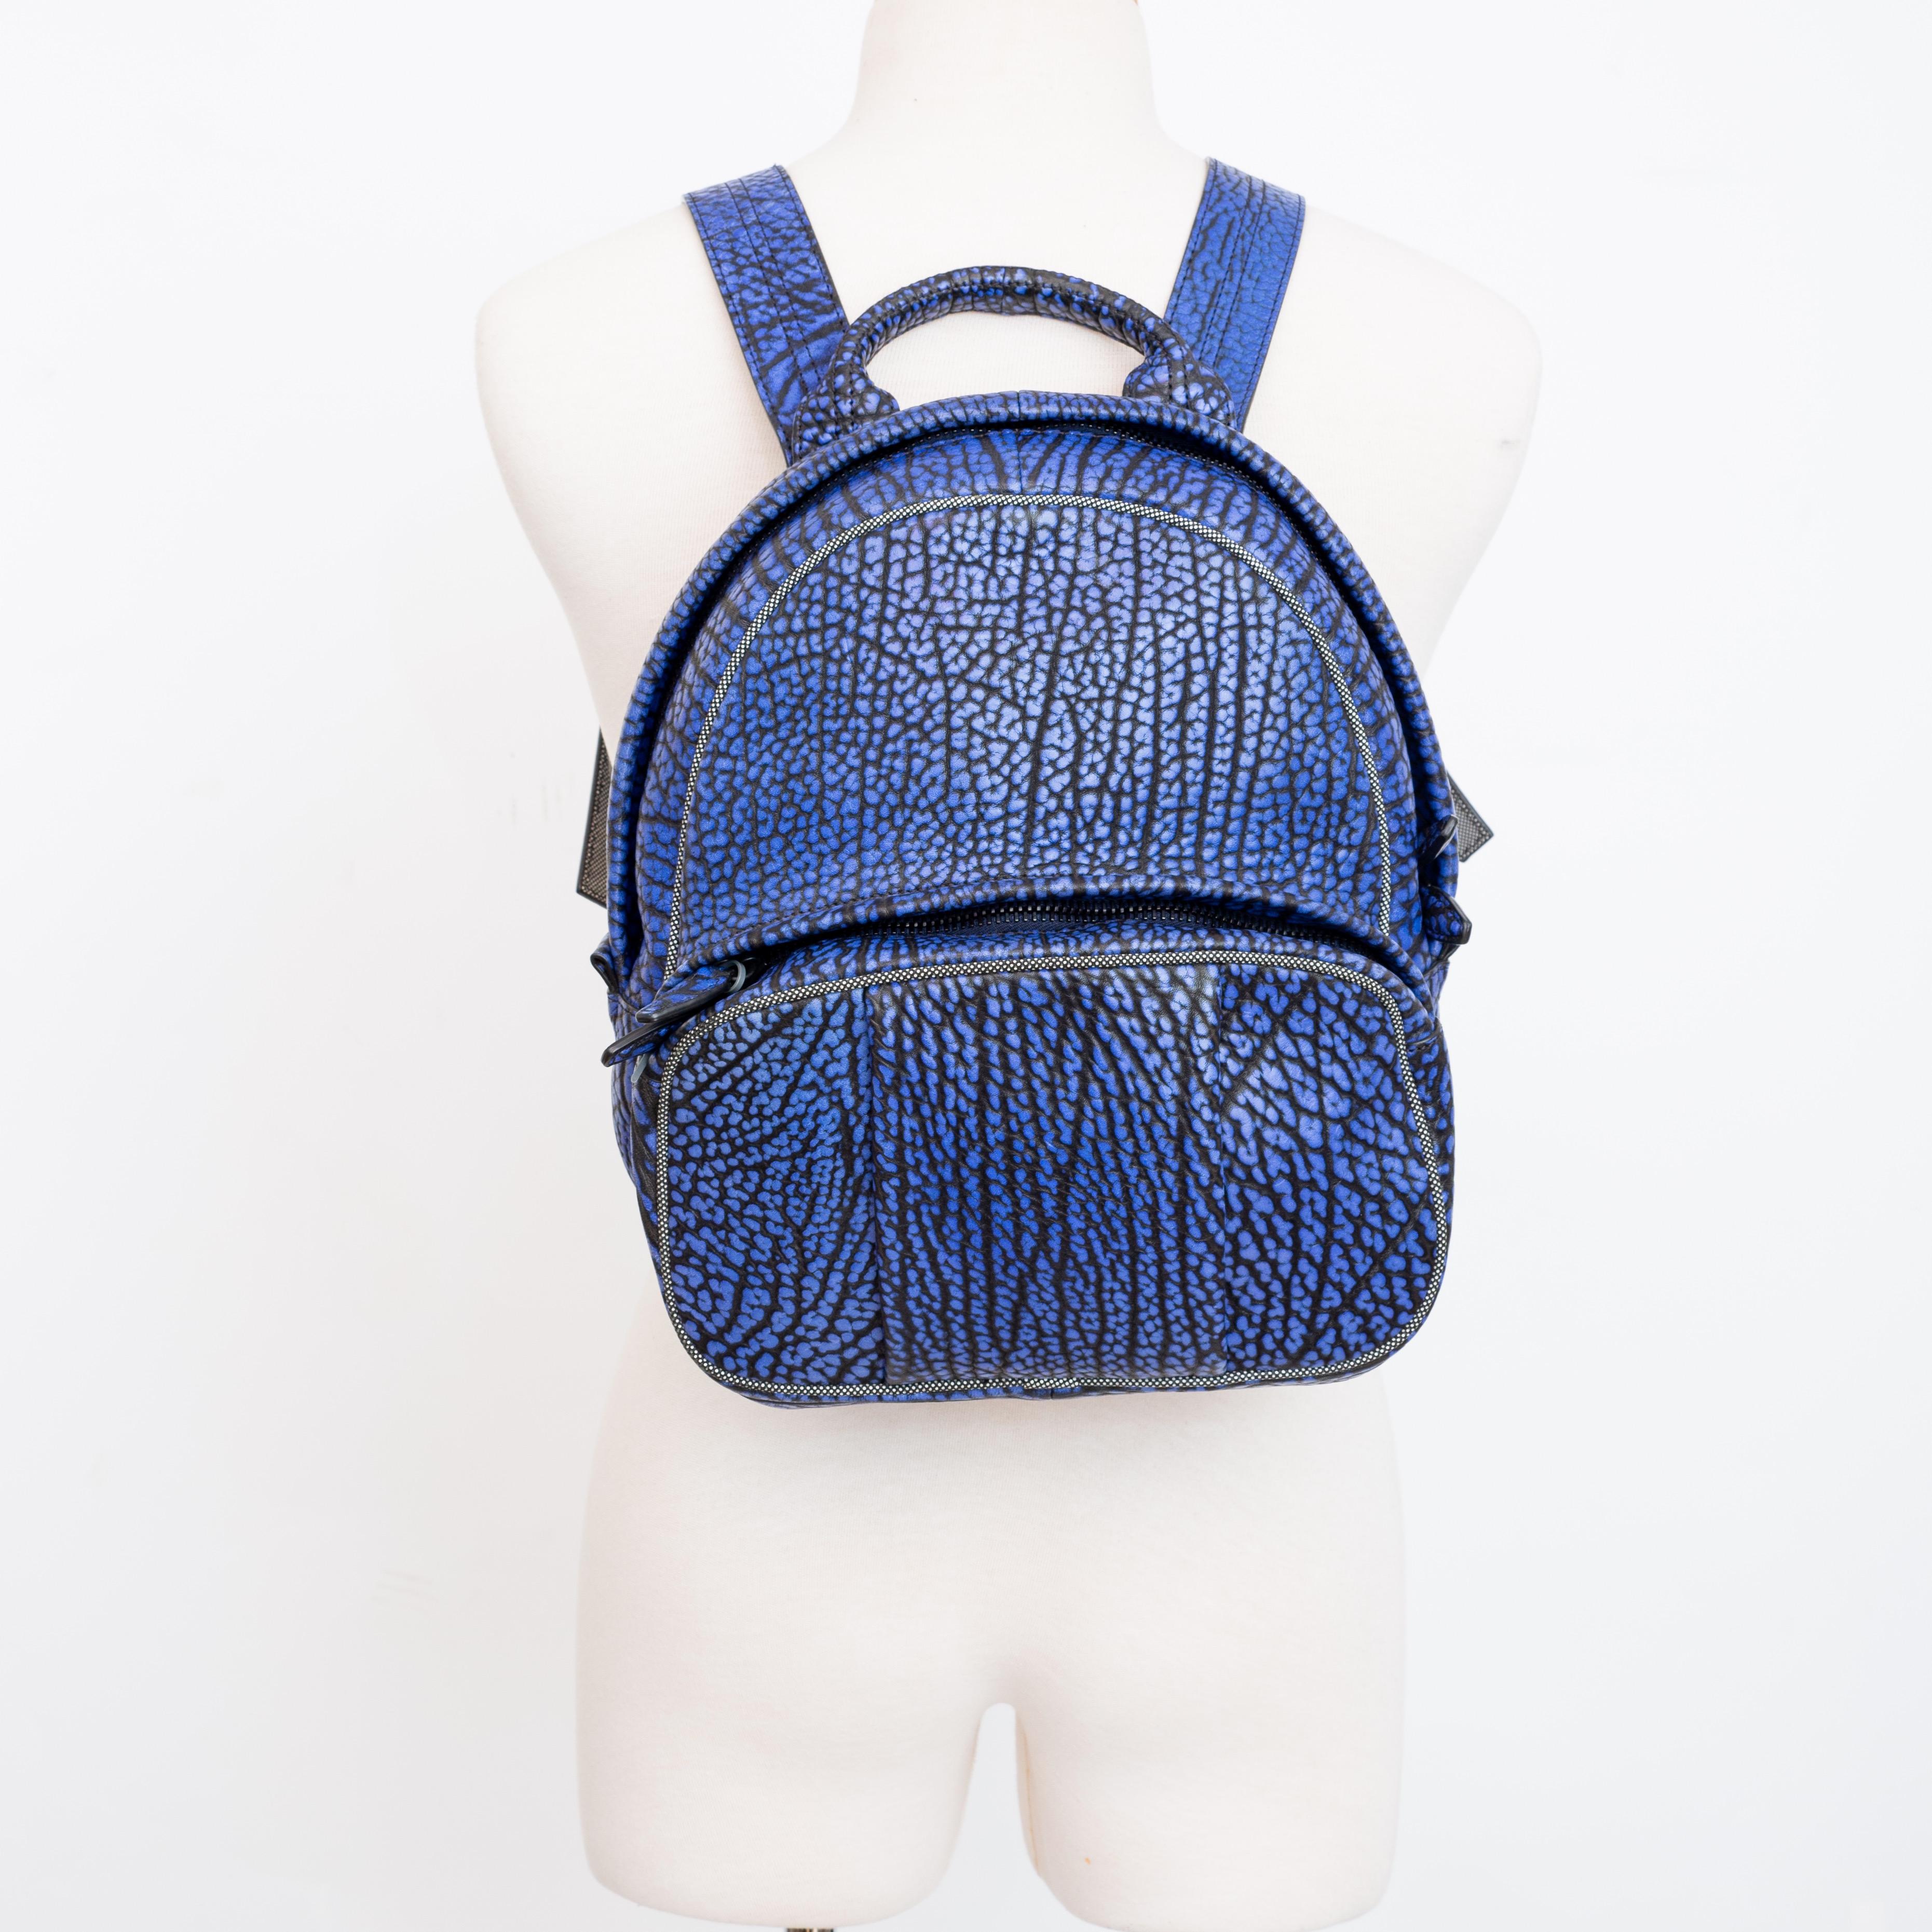 This backpack is made with pebbled lambskin in contrast tip nile blue and features black and white contrasting leather trim, black hardware, dual zip around closure, a front pocket and black fabric interior lining.

COLOR: Blue
MATERIAL: Lambskin